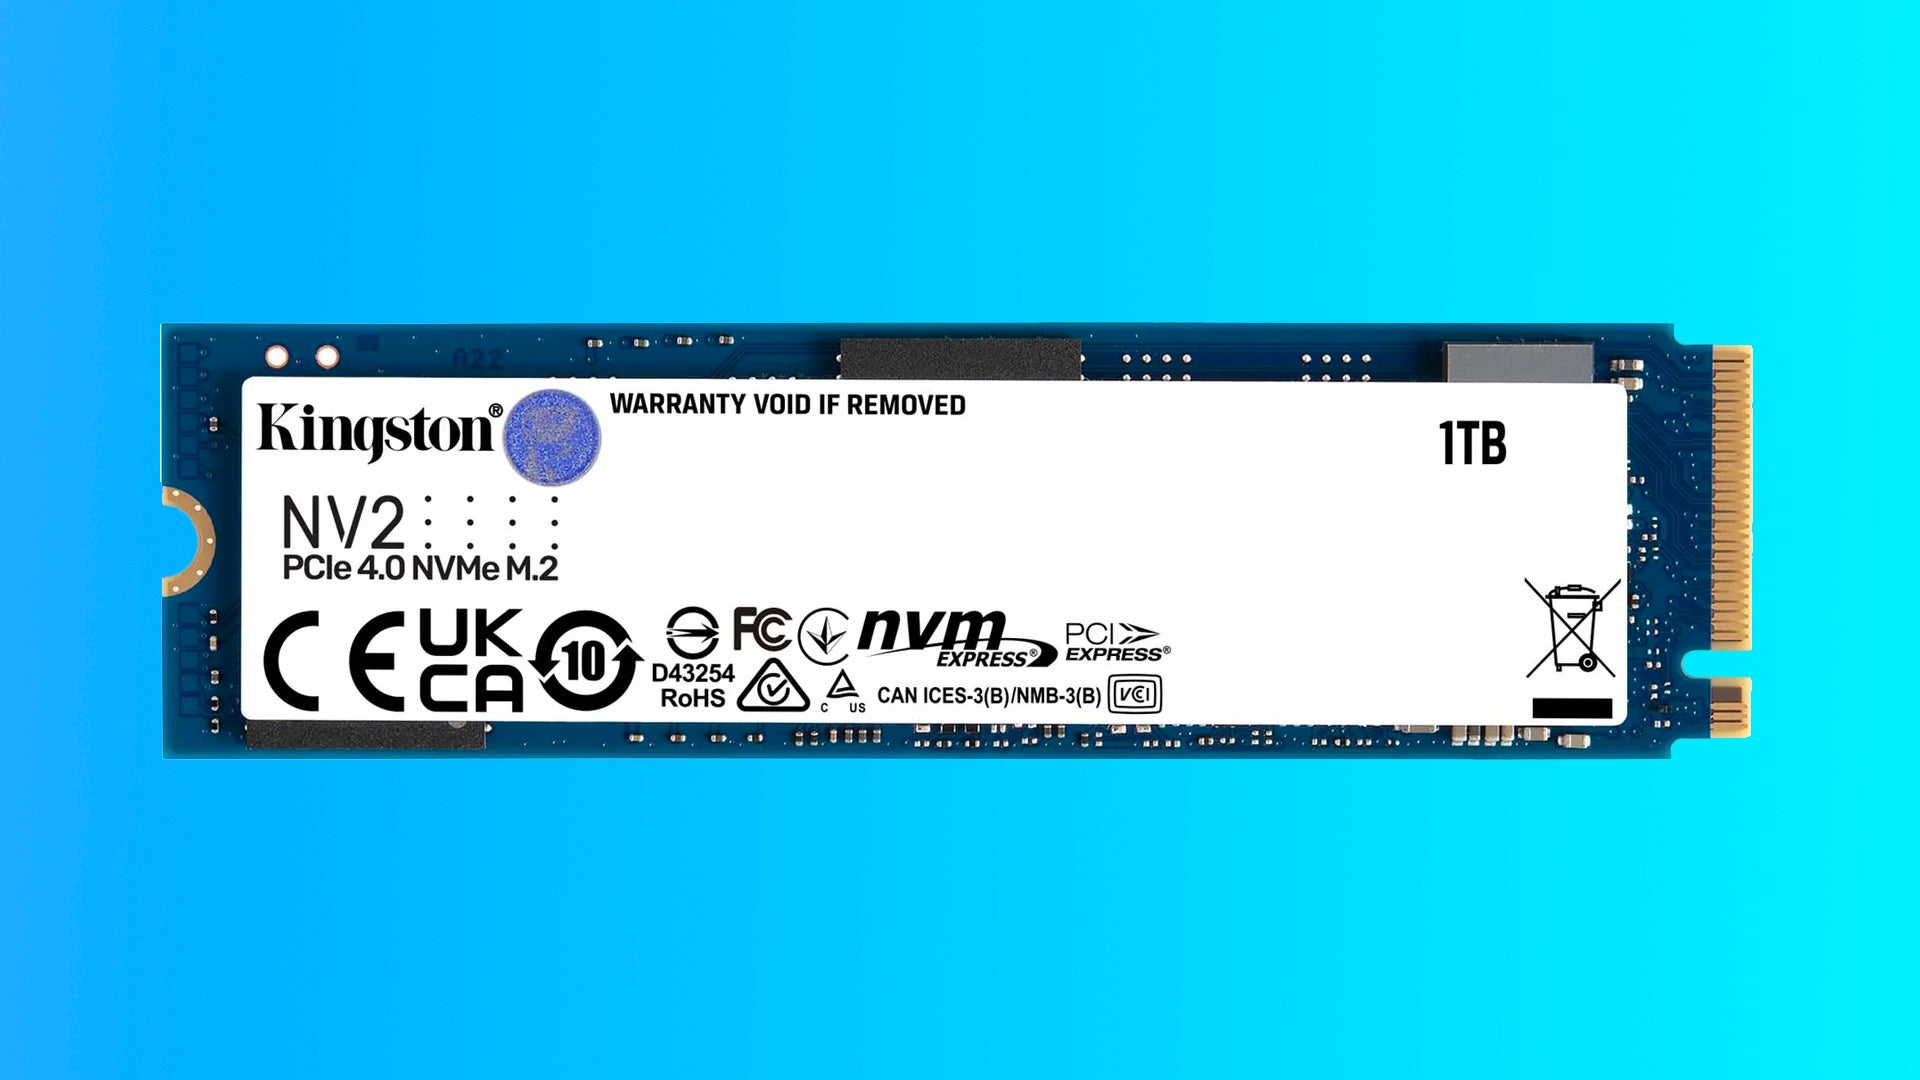 Image for Err, the Kingston NV2 NVMe SSD is down to £49 on eBay....you should go grab one!